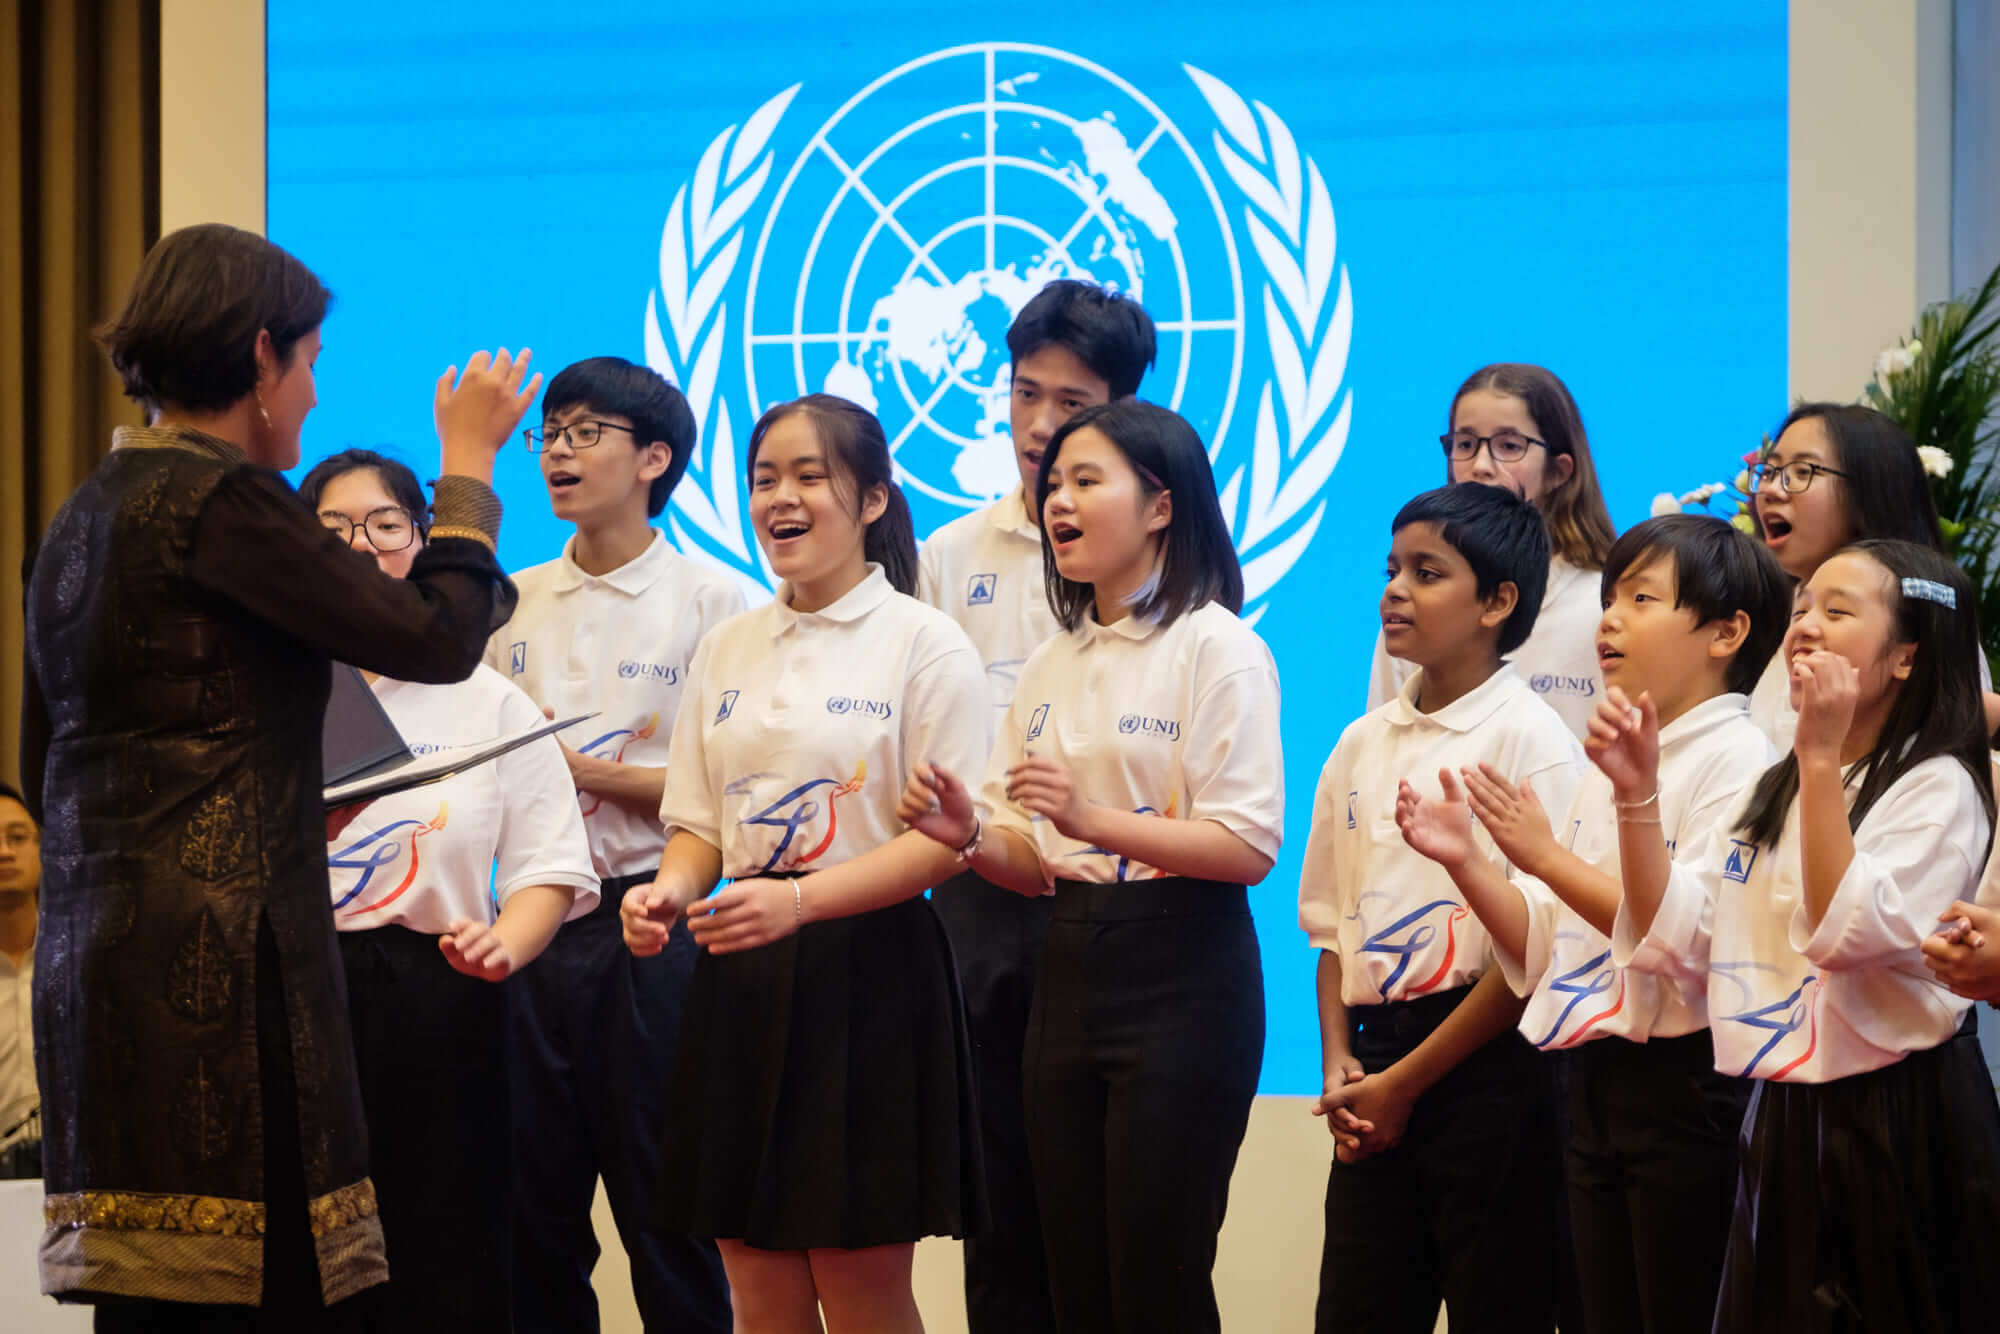 UNIS Hanoi operates on the principles of the United Nations